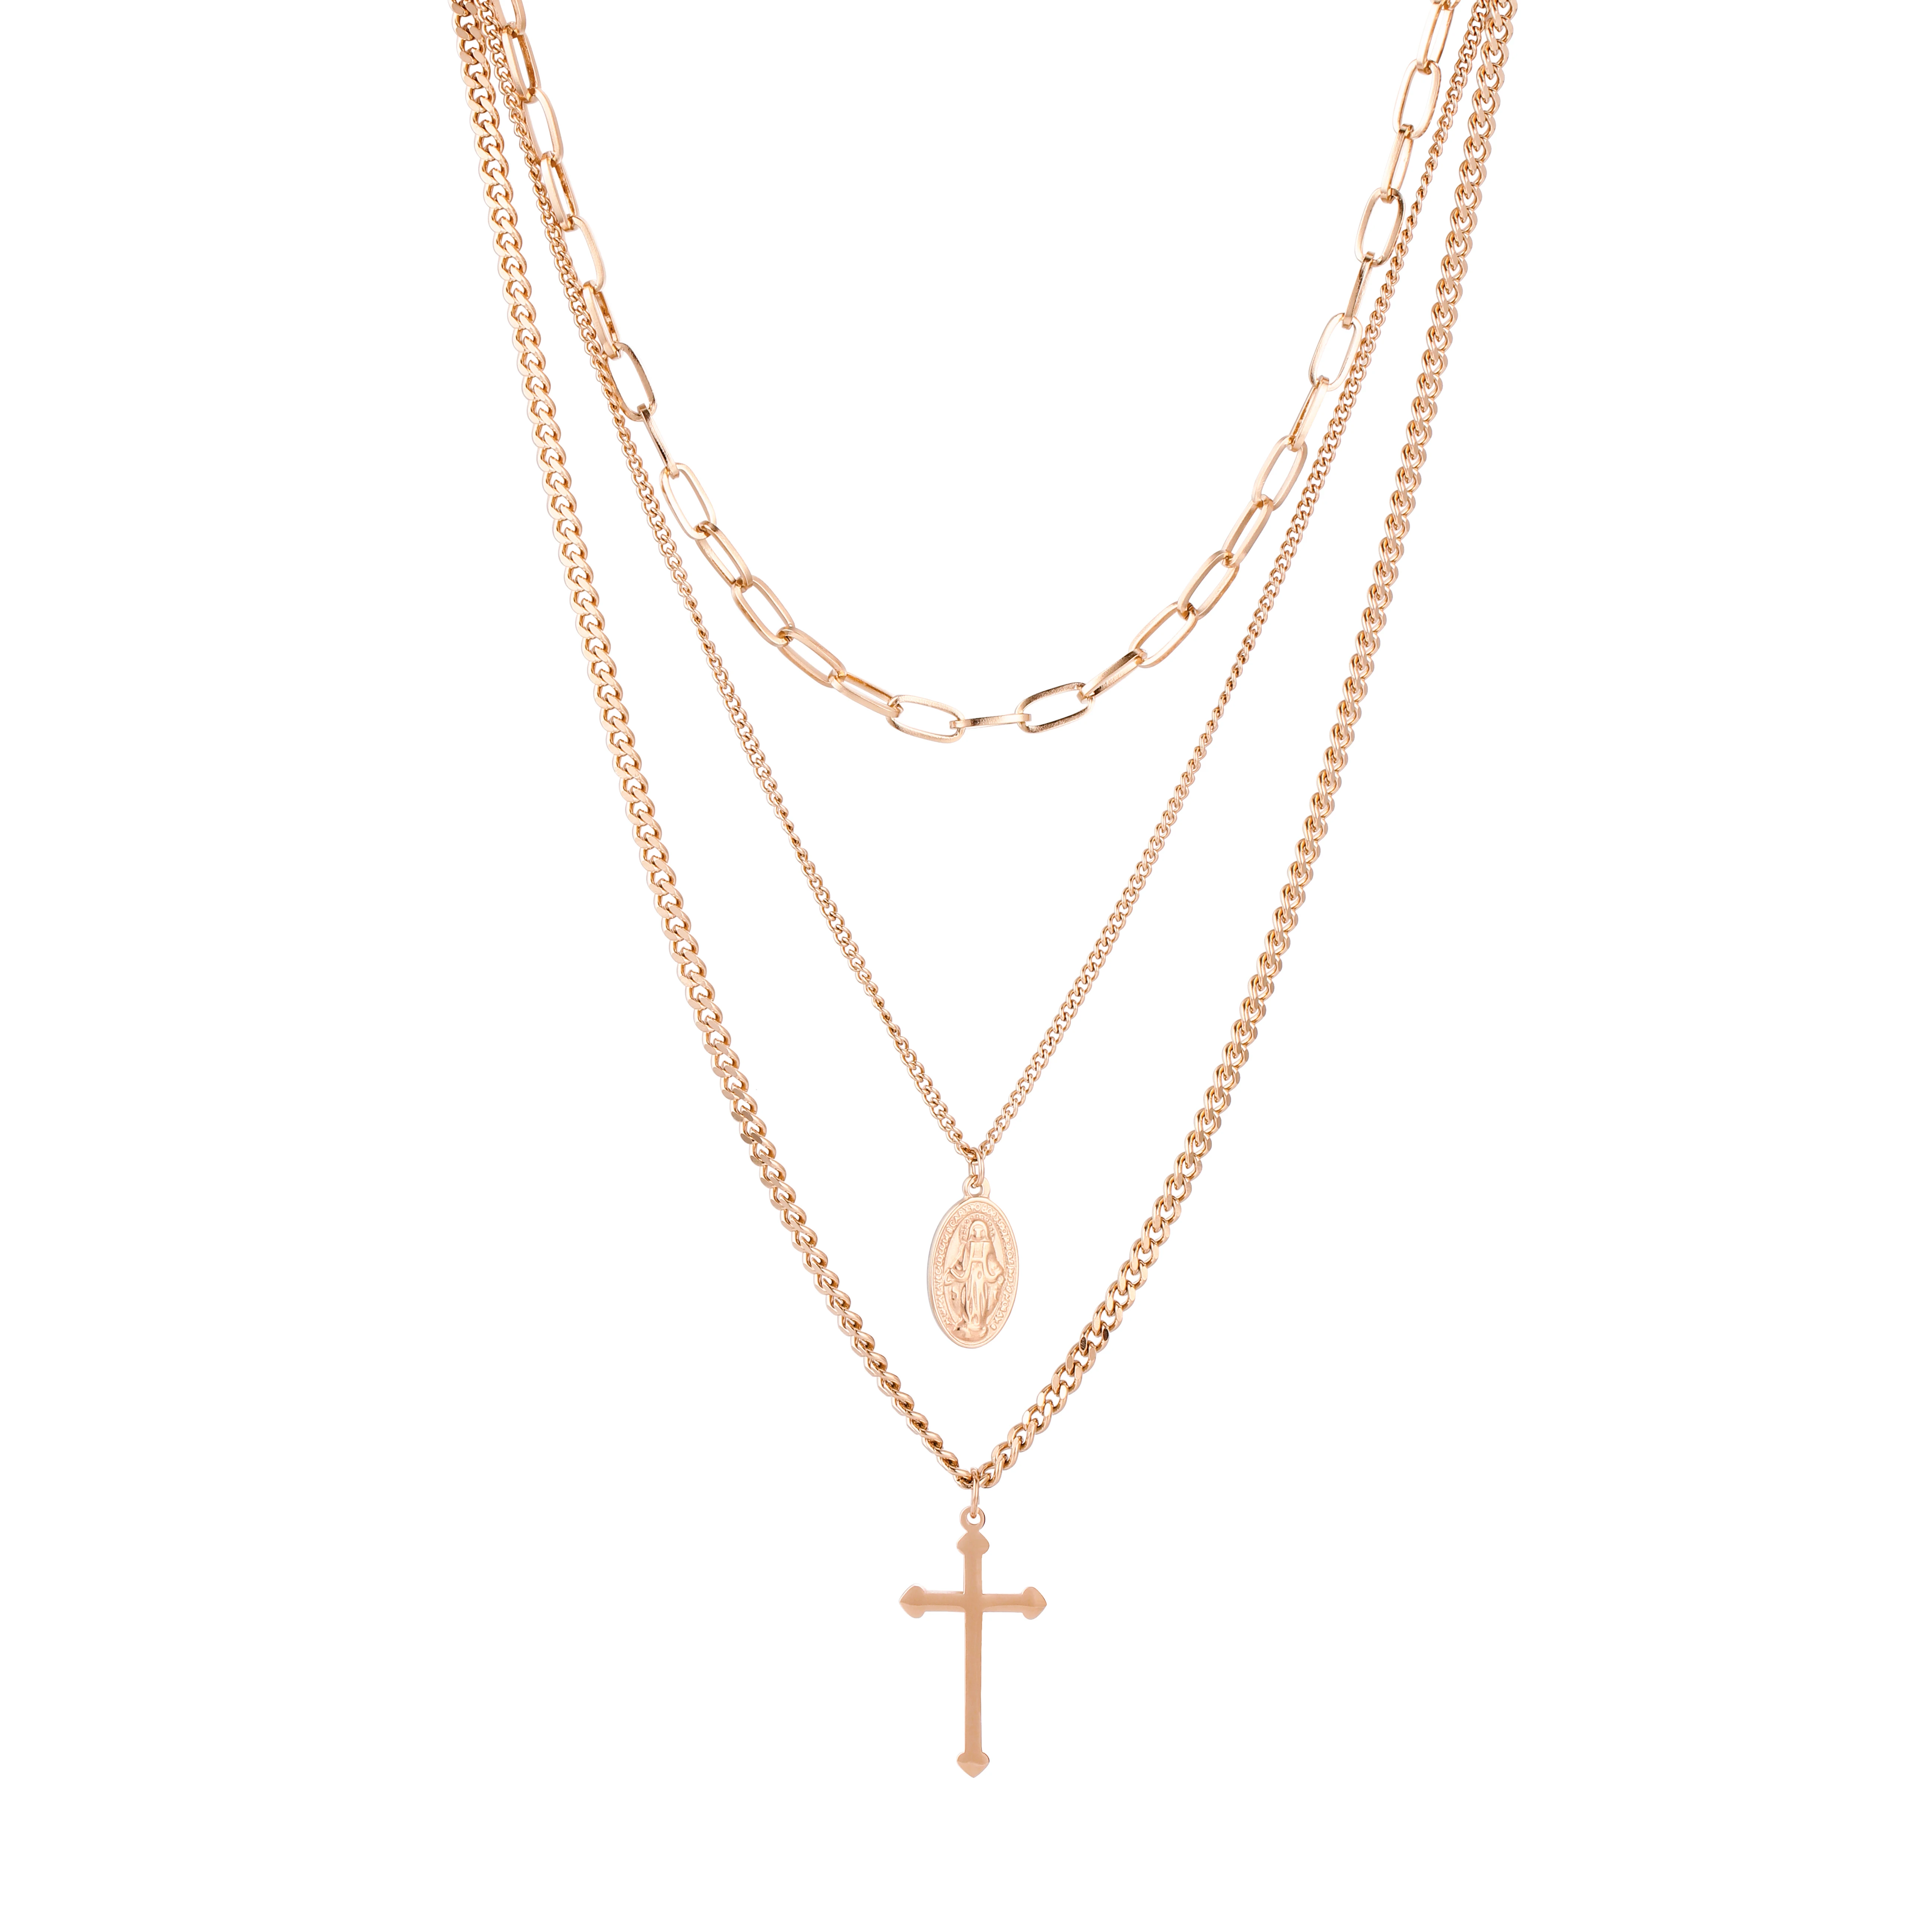 

Stainless Steel Gold Plated Chain 3 Multi Layered Women Men Virgin Mary Jesus Cross Pendant Necklace, Picture shows